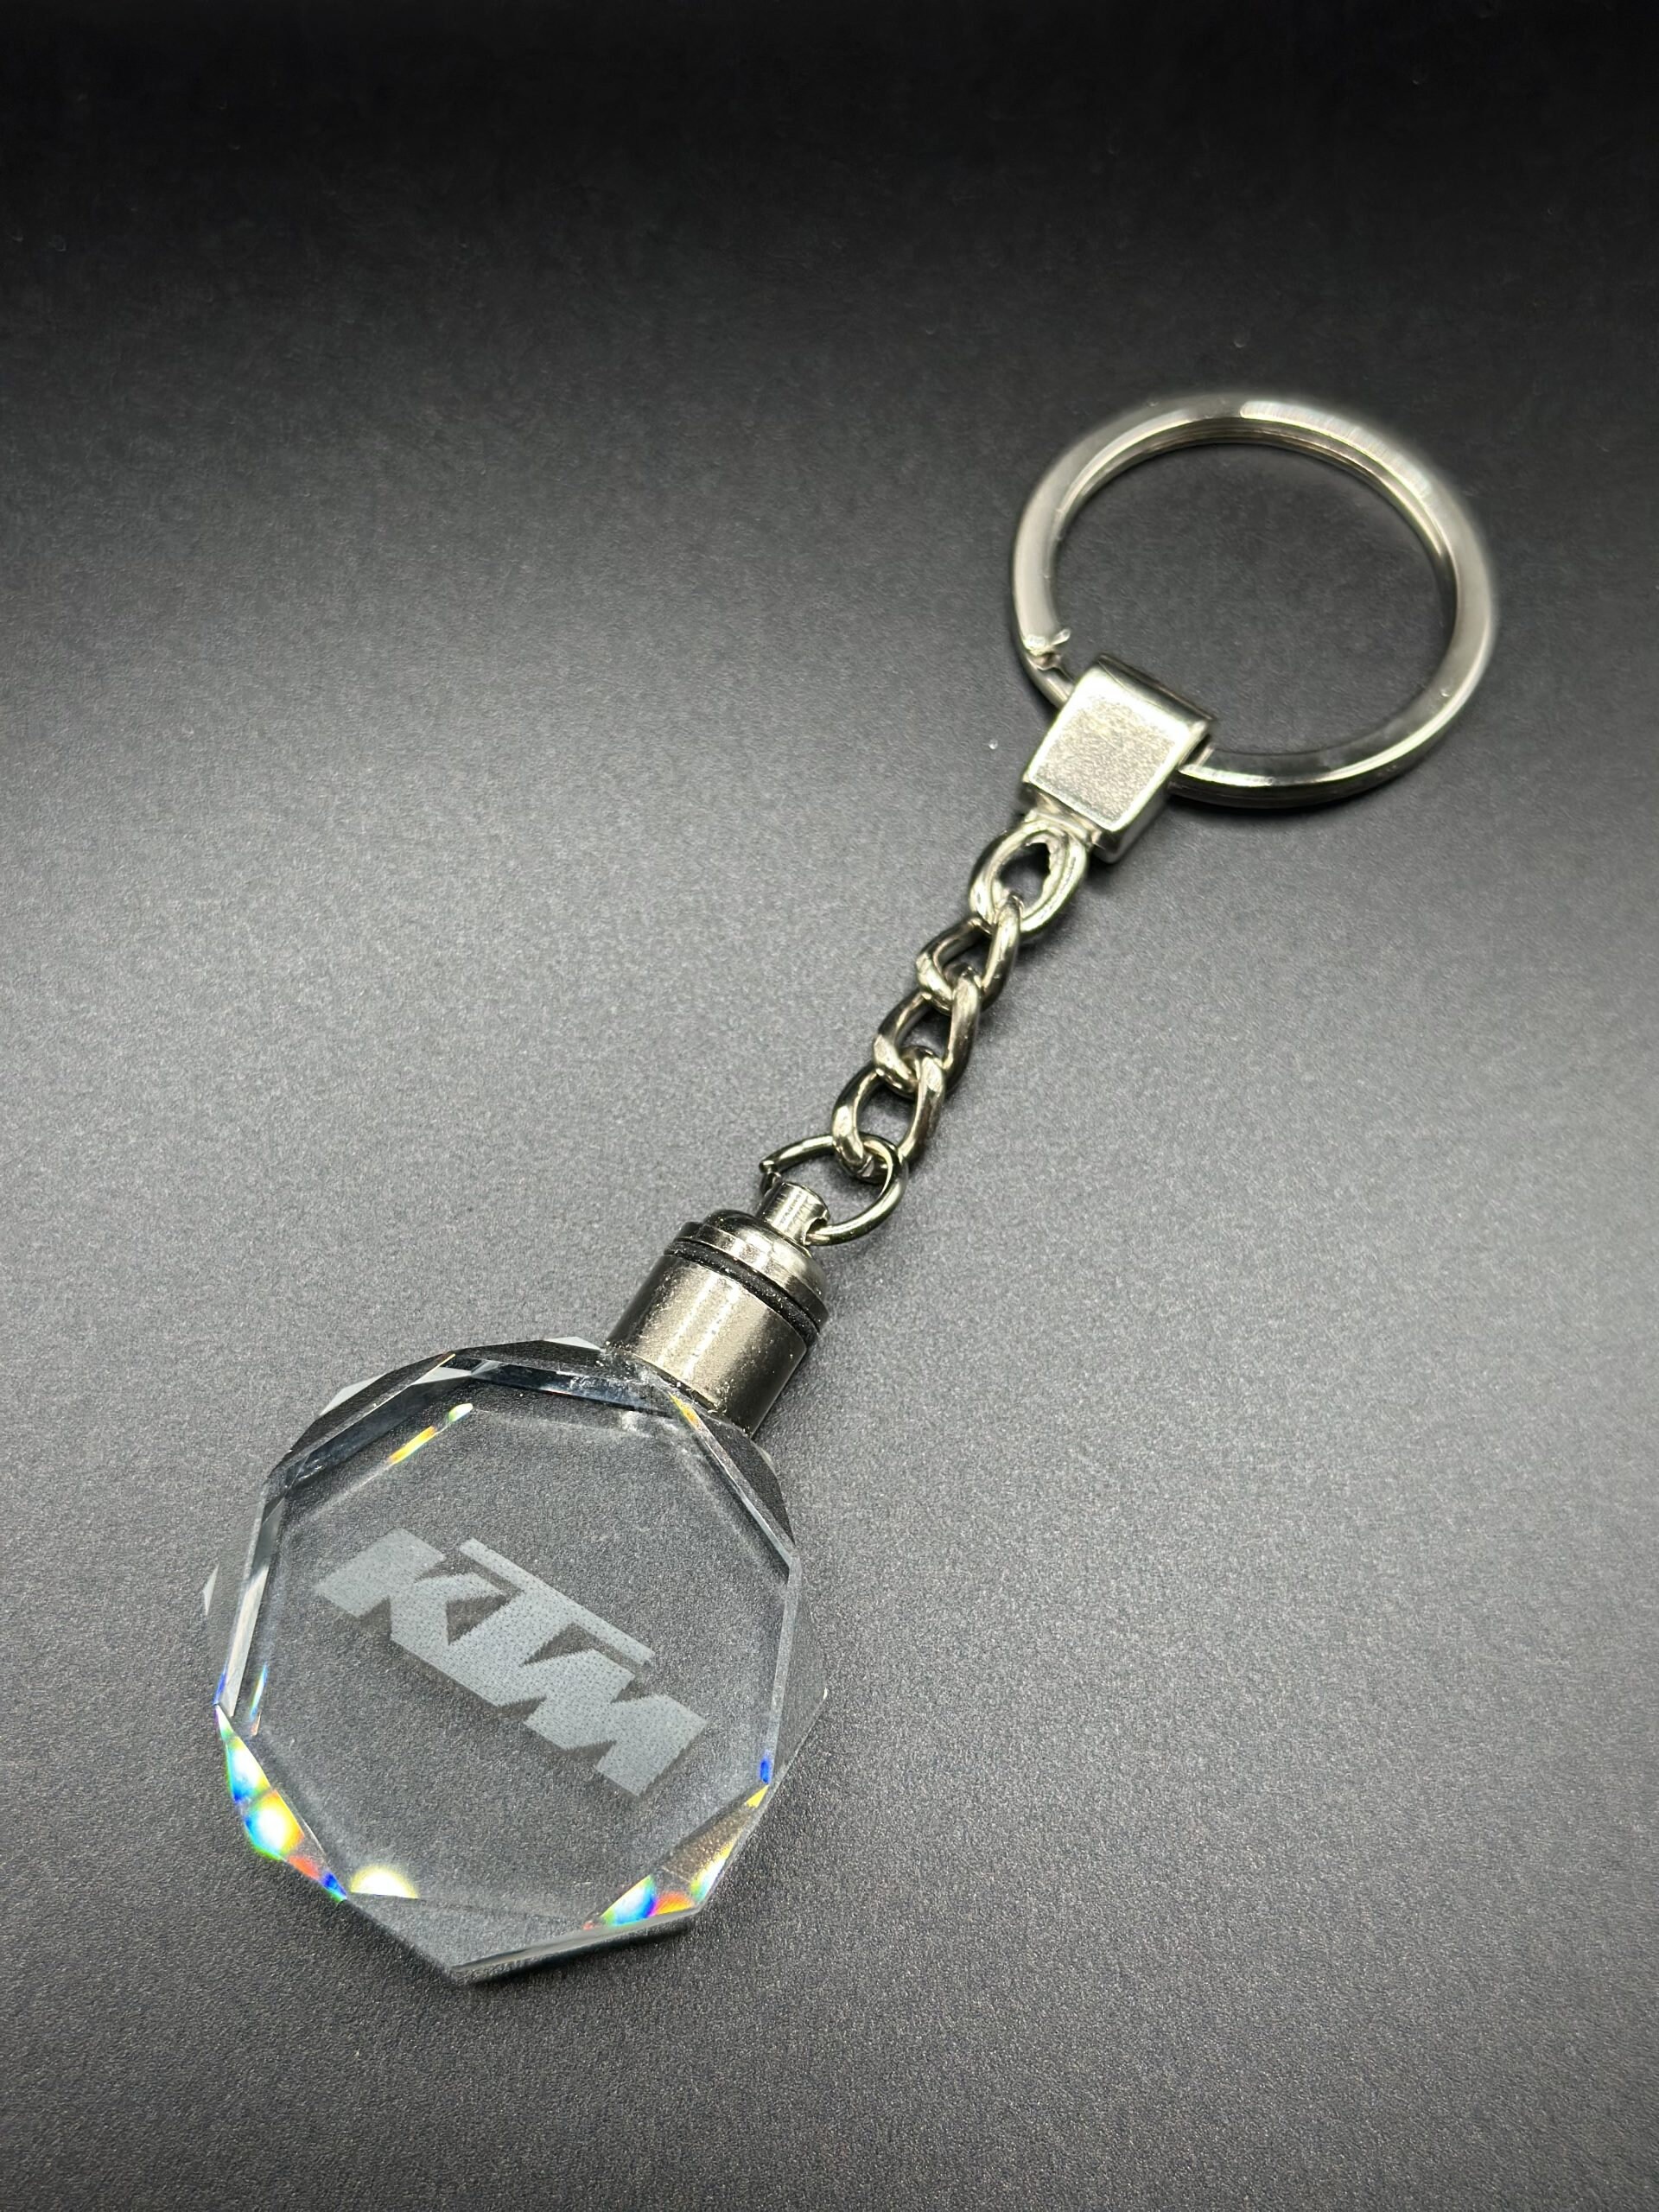 kd collections KD-264 Double Sided Silicon Rubber KTM Keychain Keyring  Orange Key Chain Price in India - Buy kd collections KD-264 Double Sided  Silicon Rubber KTM Keychain Keyring Orange Key Chain online at Flipkart.com